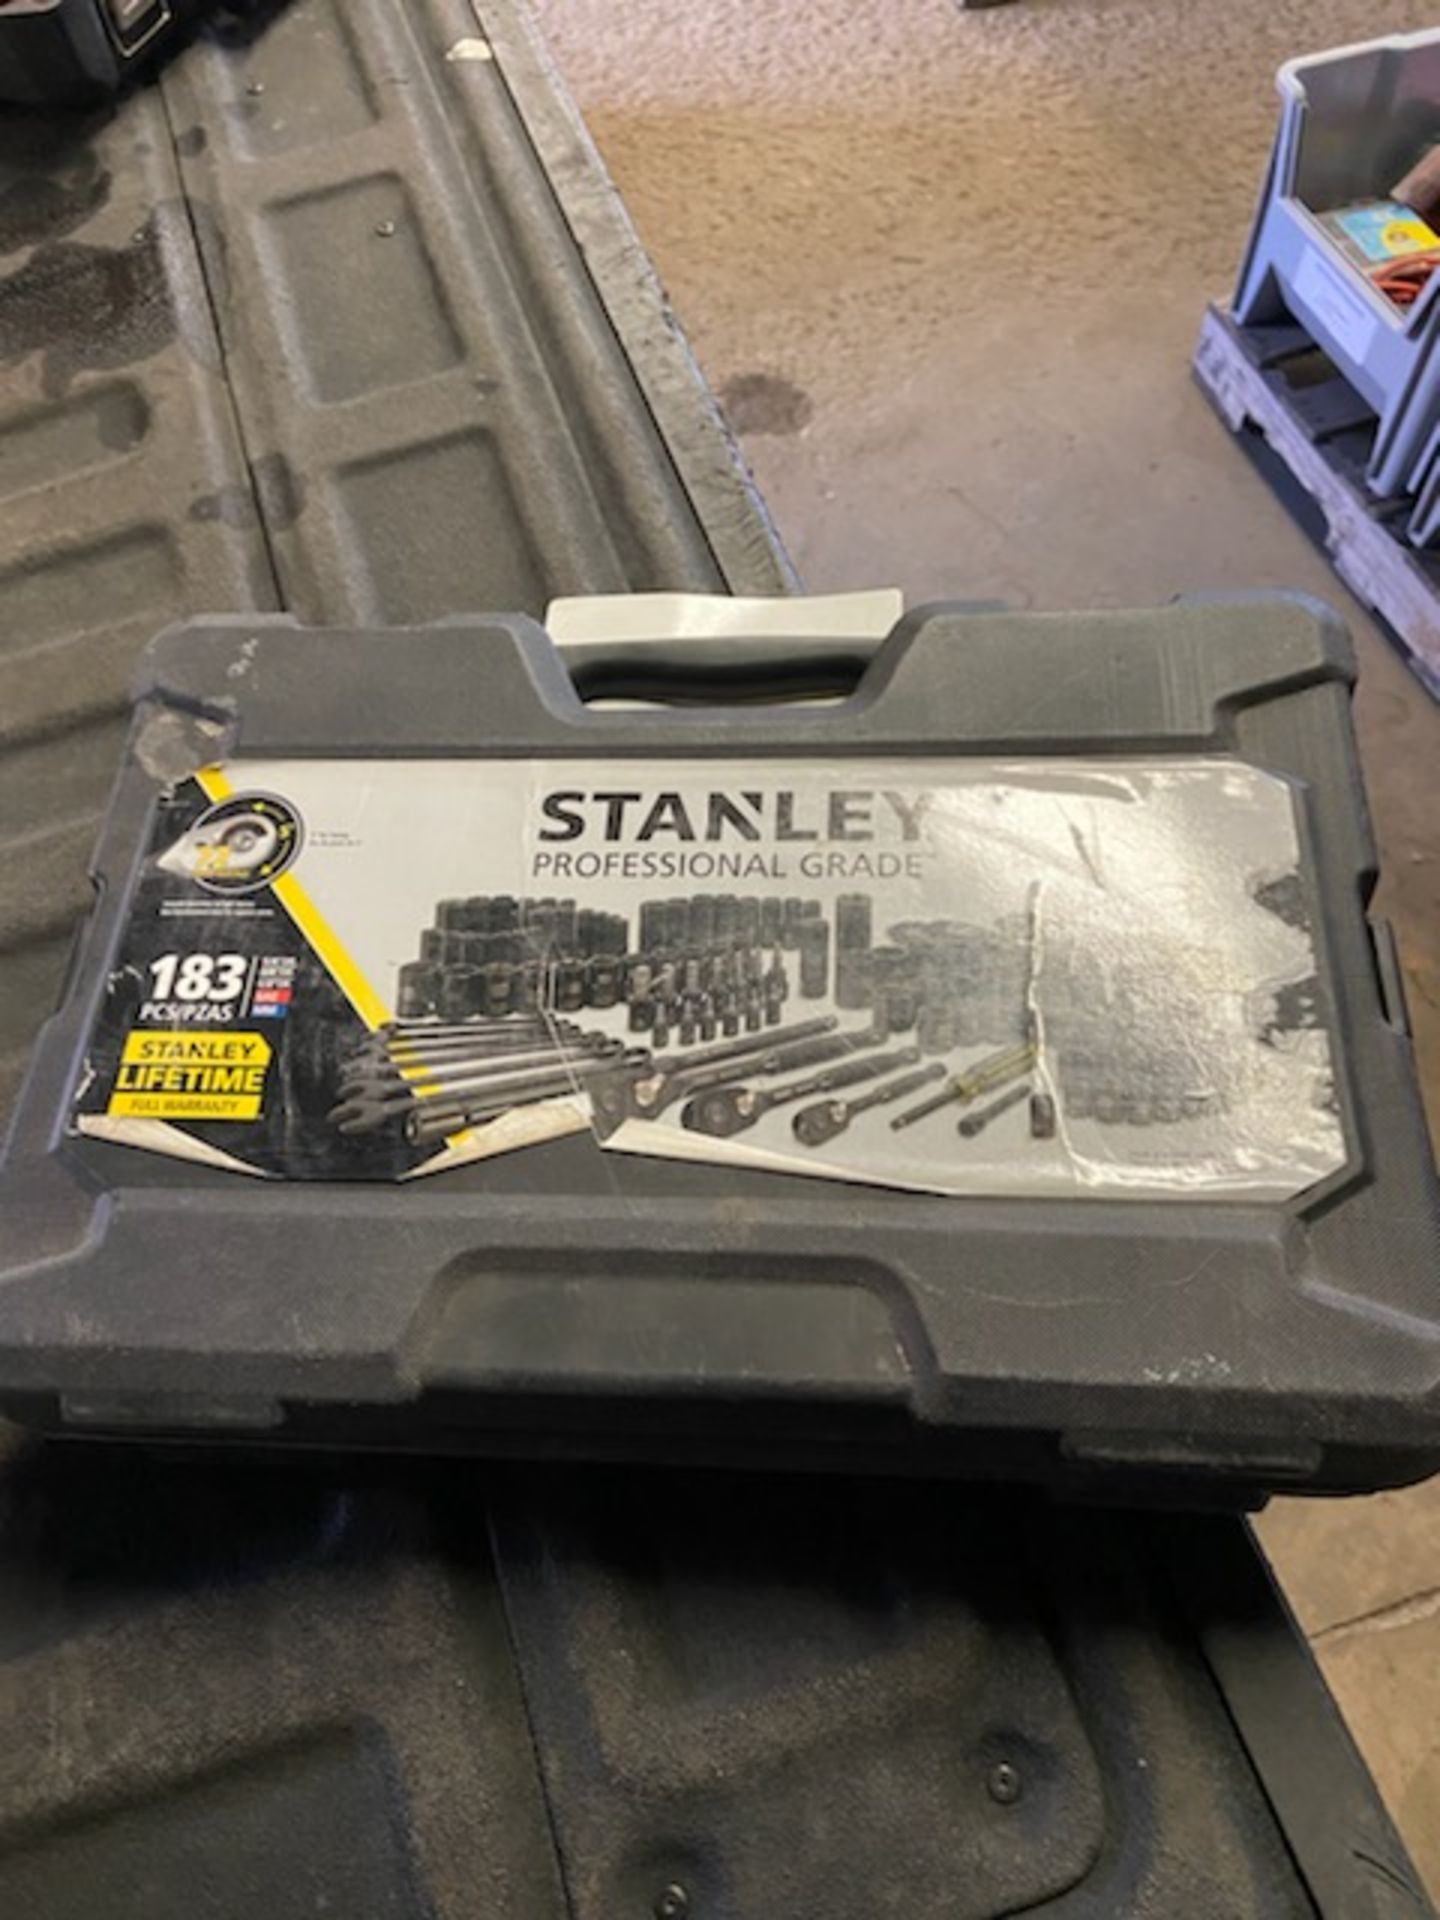 STANLEY PROFESSIONAL GRADE 183 PIECE SOCKET & WRENCH KIT - Image 2 of 2